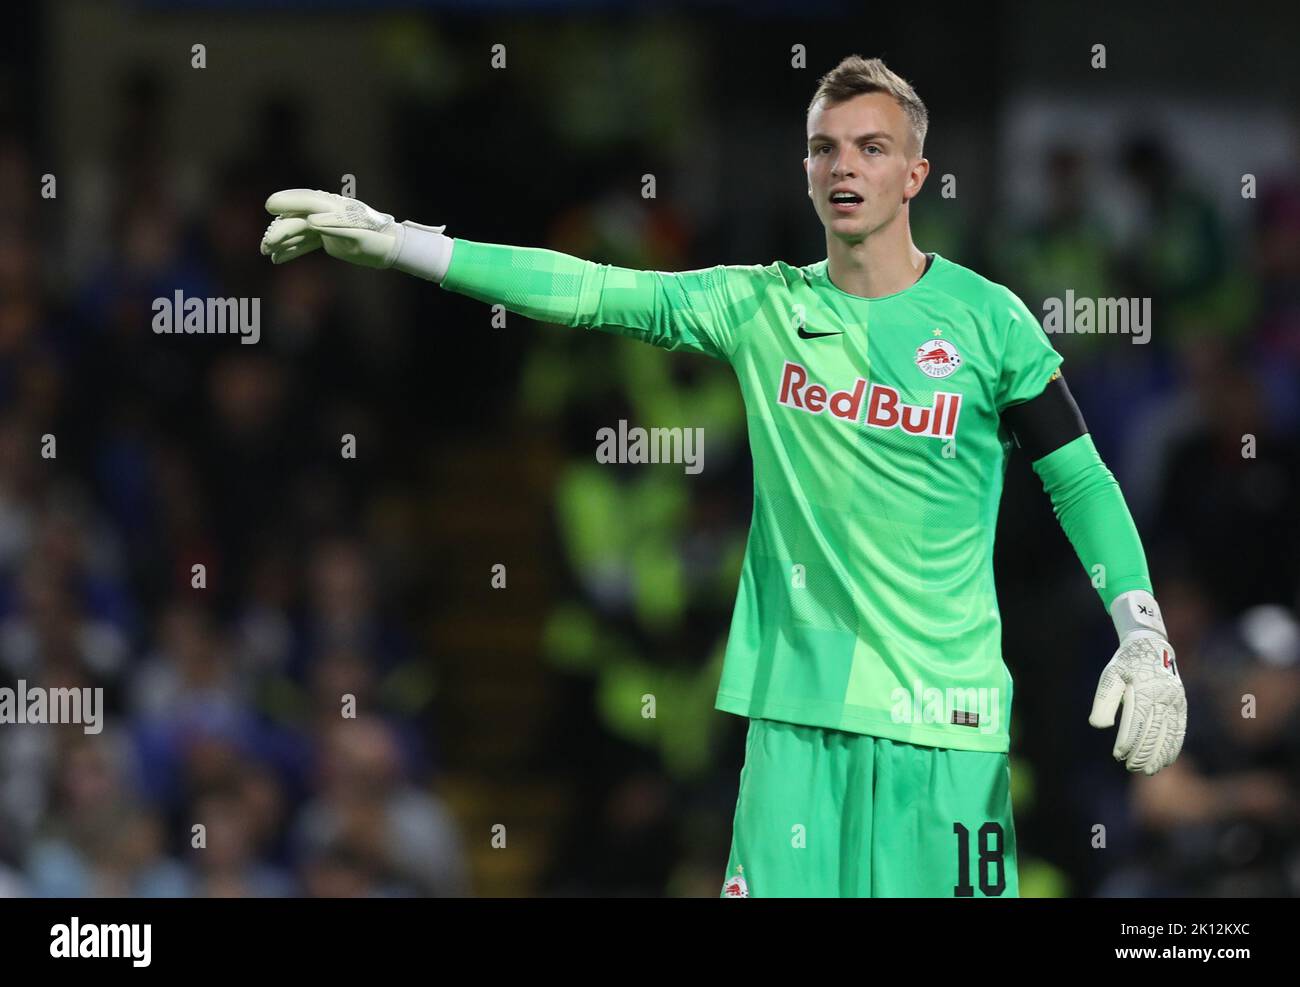 London, England, 14th September 2022. Philipp Köhn of Red Bull Salzburg during the UEFA Champions League match at Stamford Bridge, London. Picture credit should read: Paul Terry / Sportimage Stock Photo